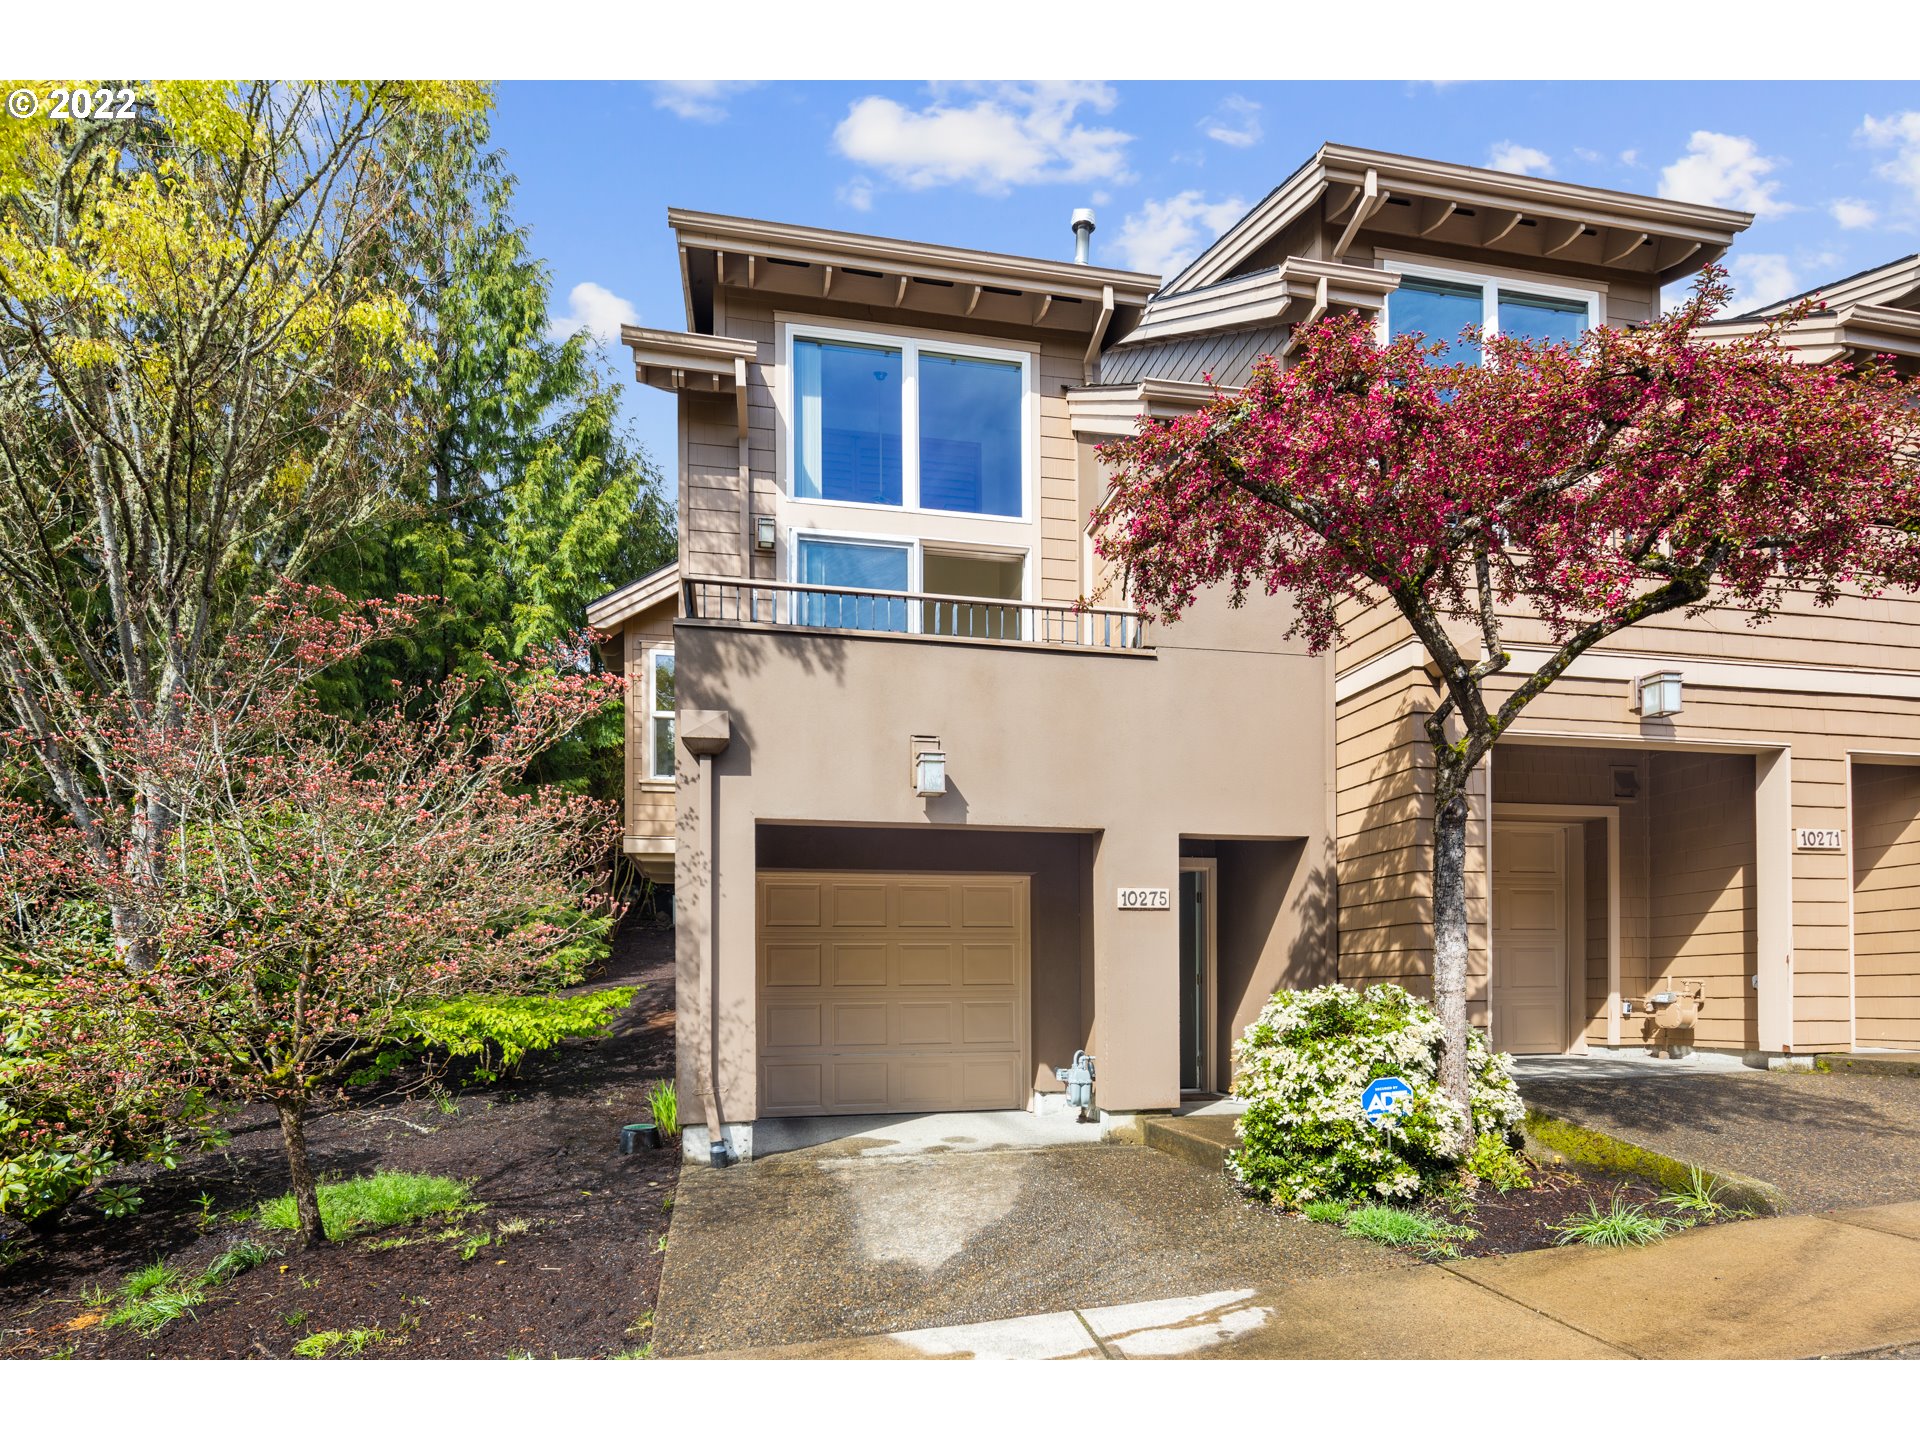 More Details about MLS # 22633061 : 10275 NW ALDER GROVE LN 